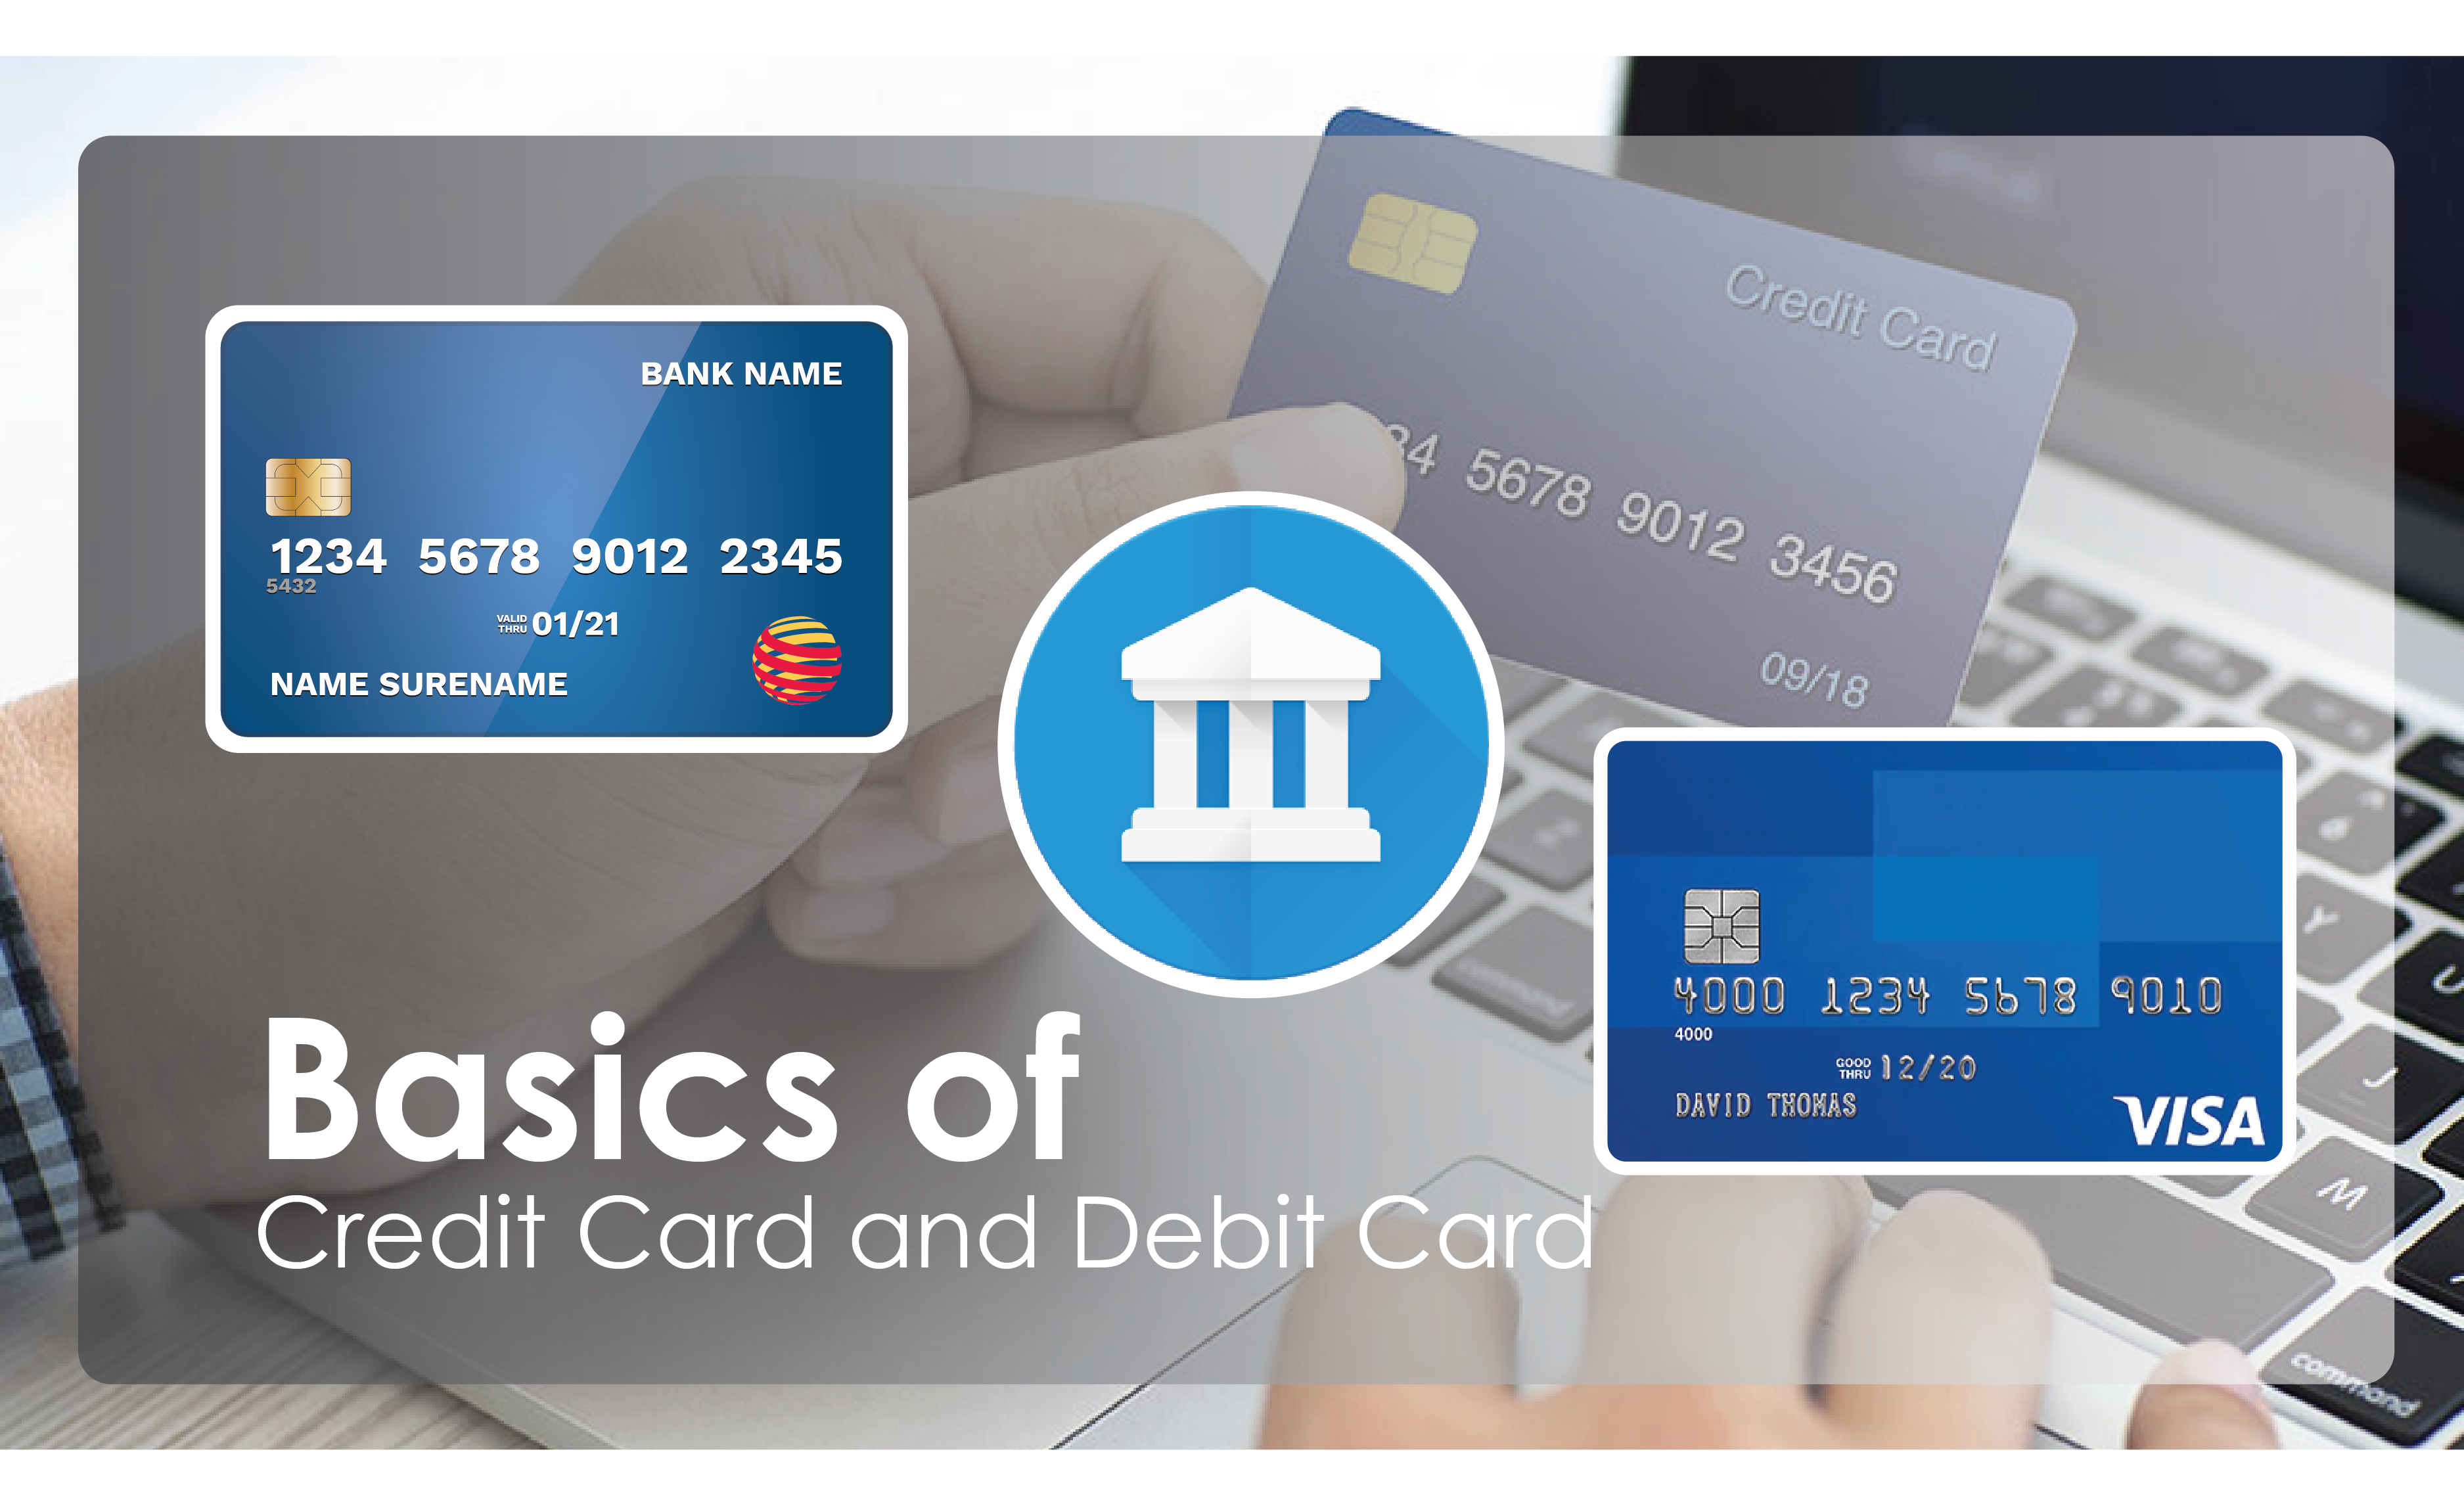 Basics of Credit Card and Debit Card